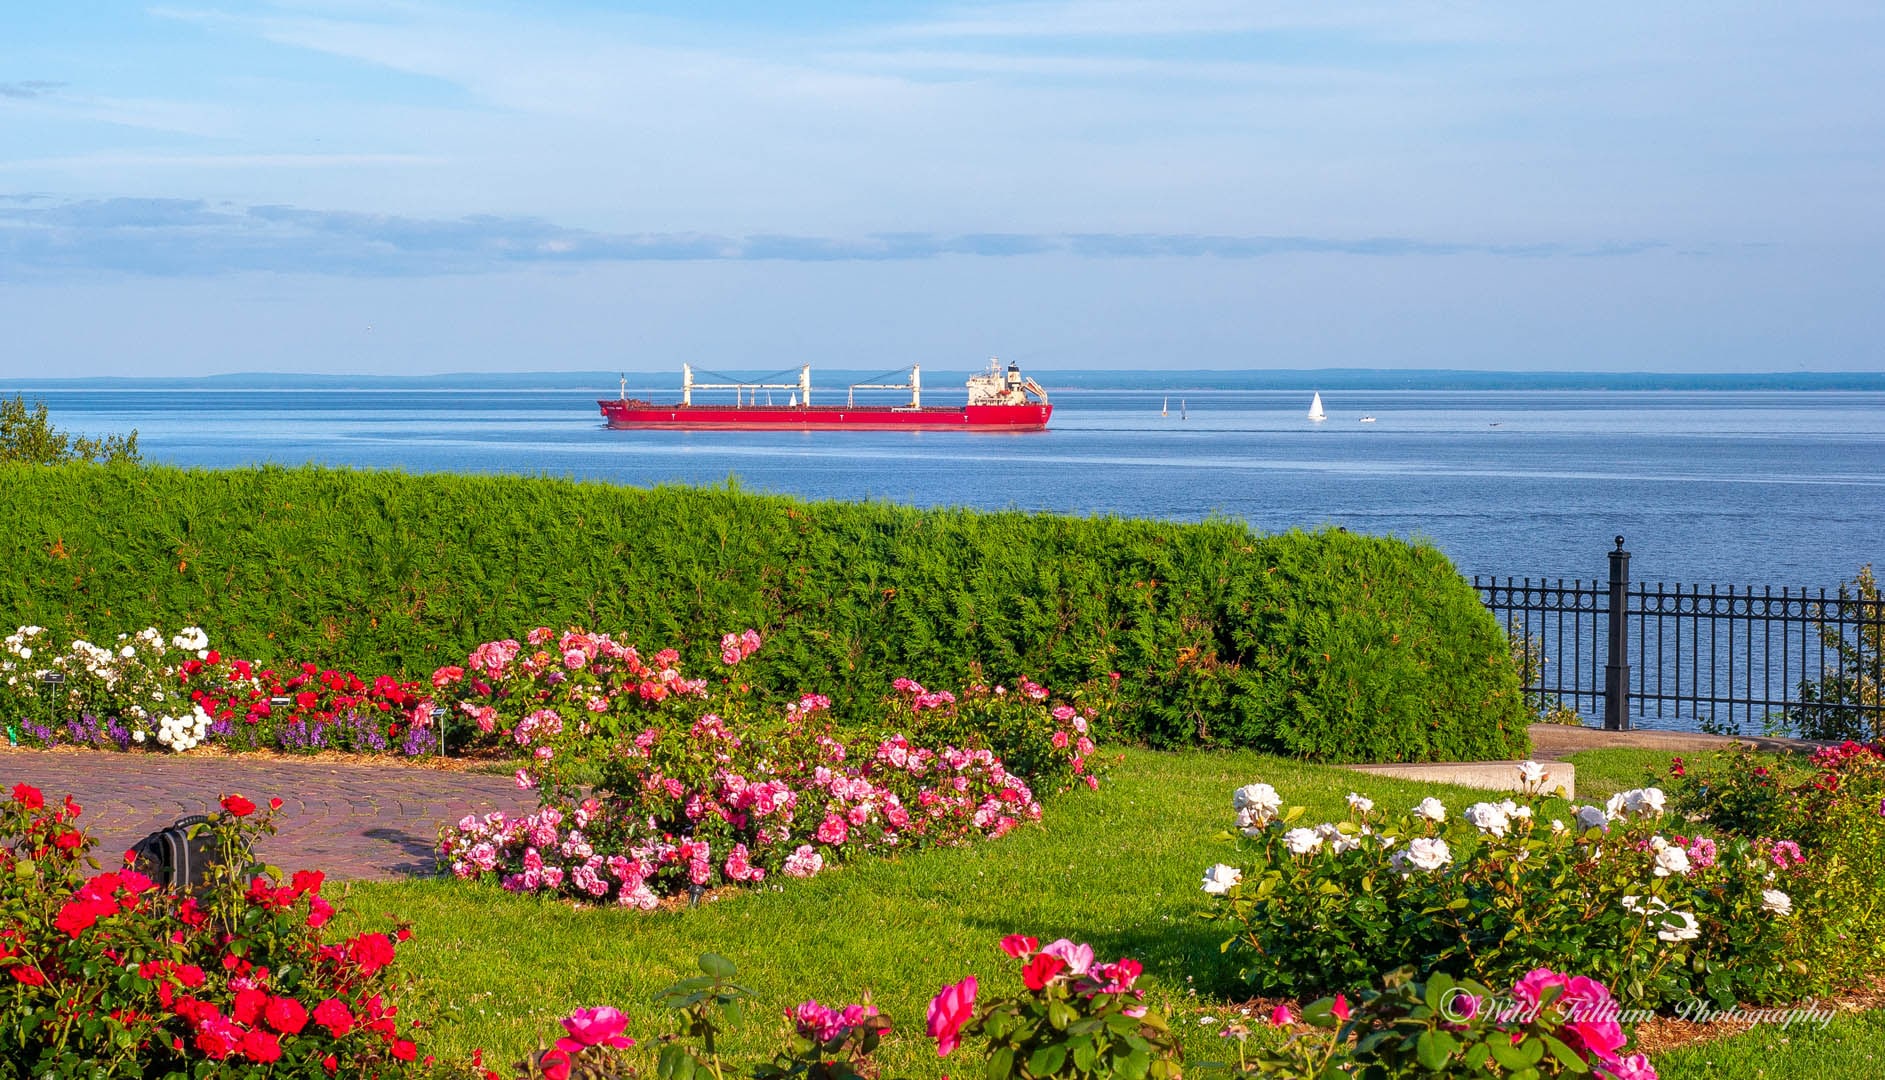 Red, pink and white rose bushes with a salty and sailboats in the distance.